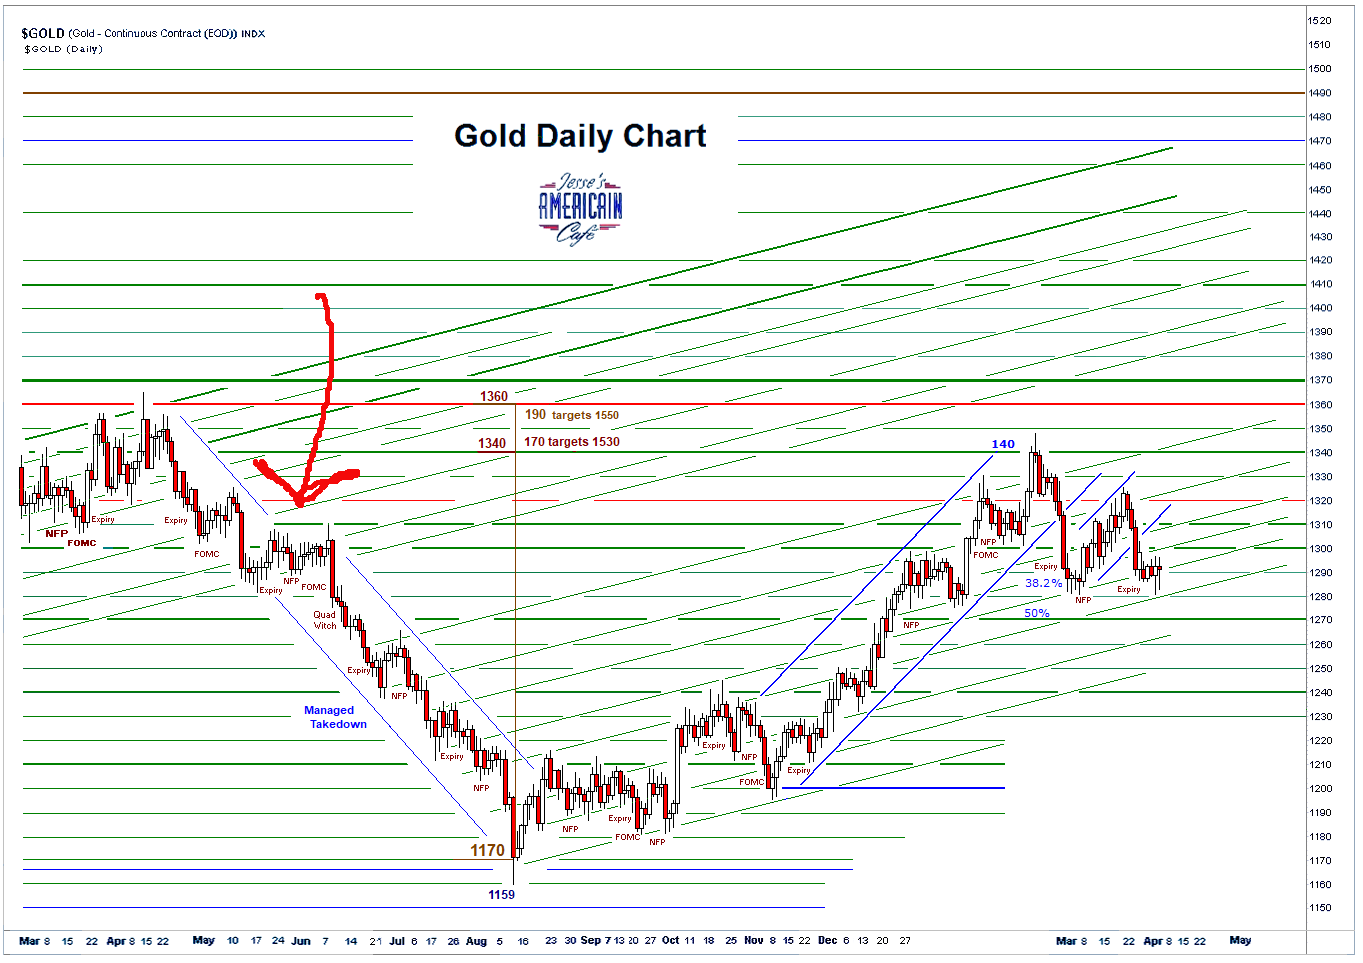 GOLD DAILY 05-04-2019.PNG